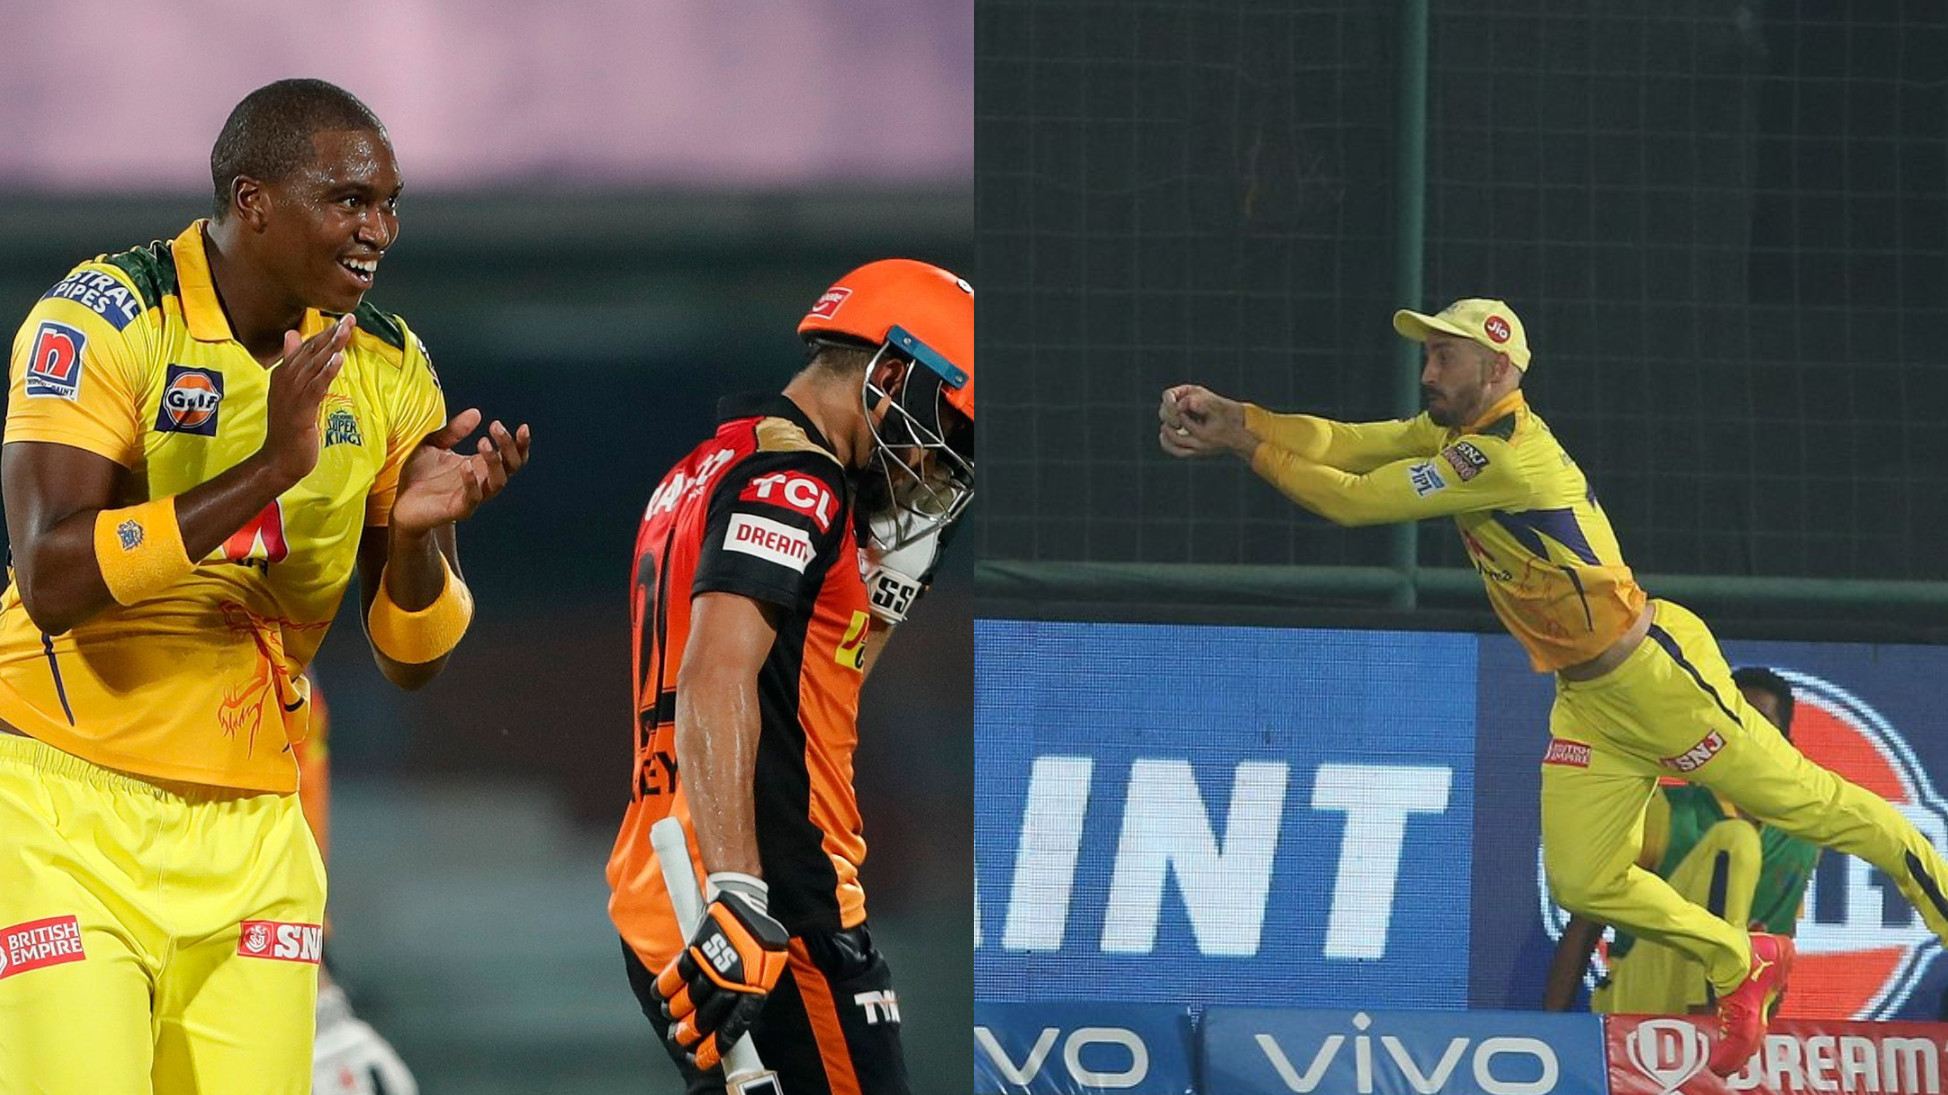 IPL 2021: WATCH- Faf du Plessis flies near the boundary and takes an amazing catch